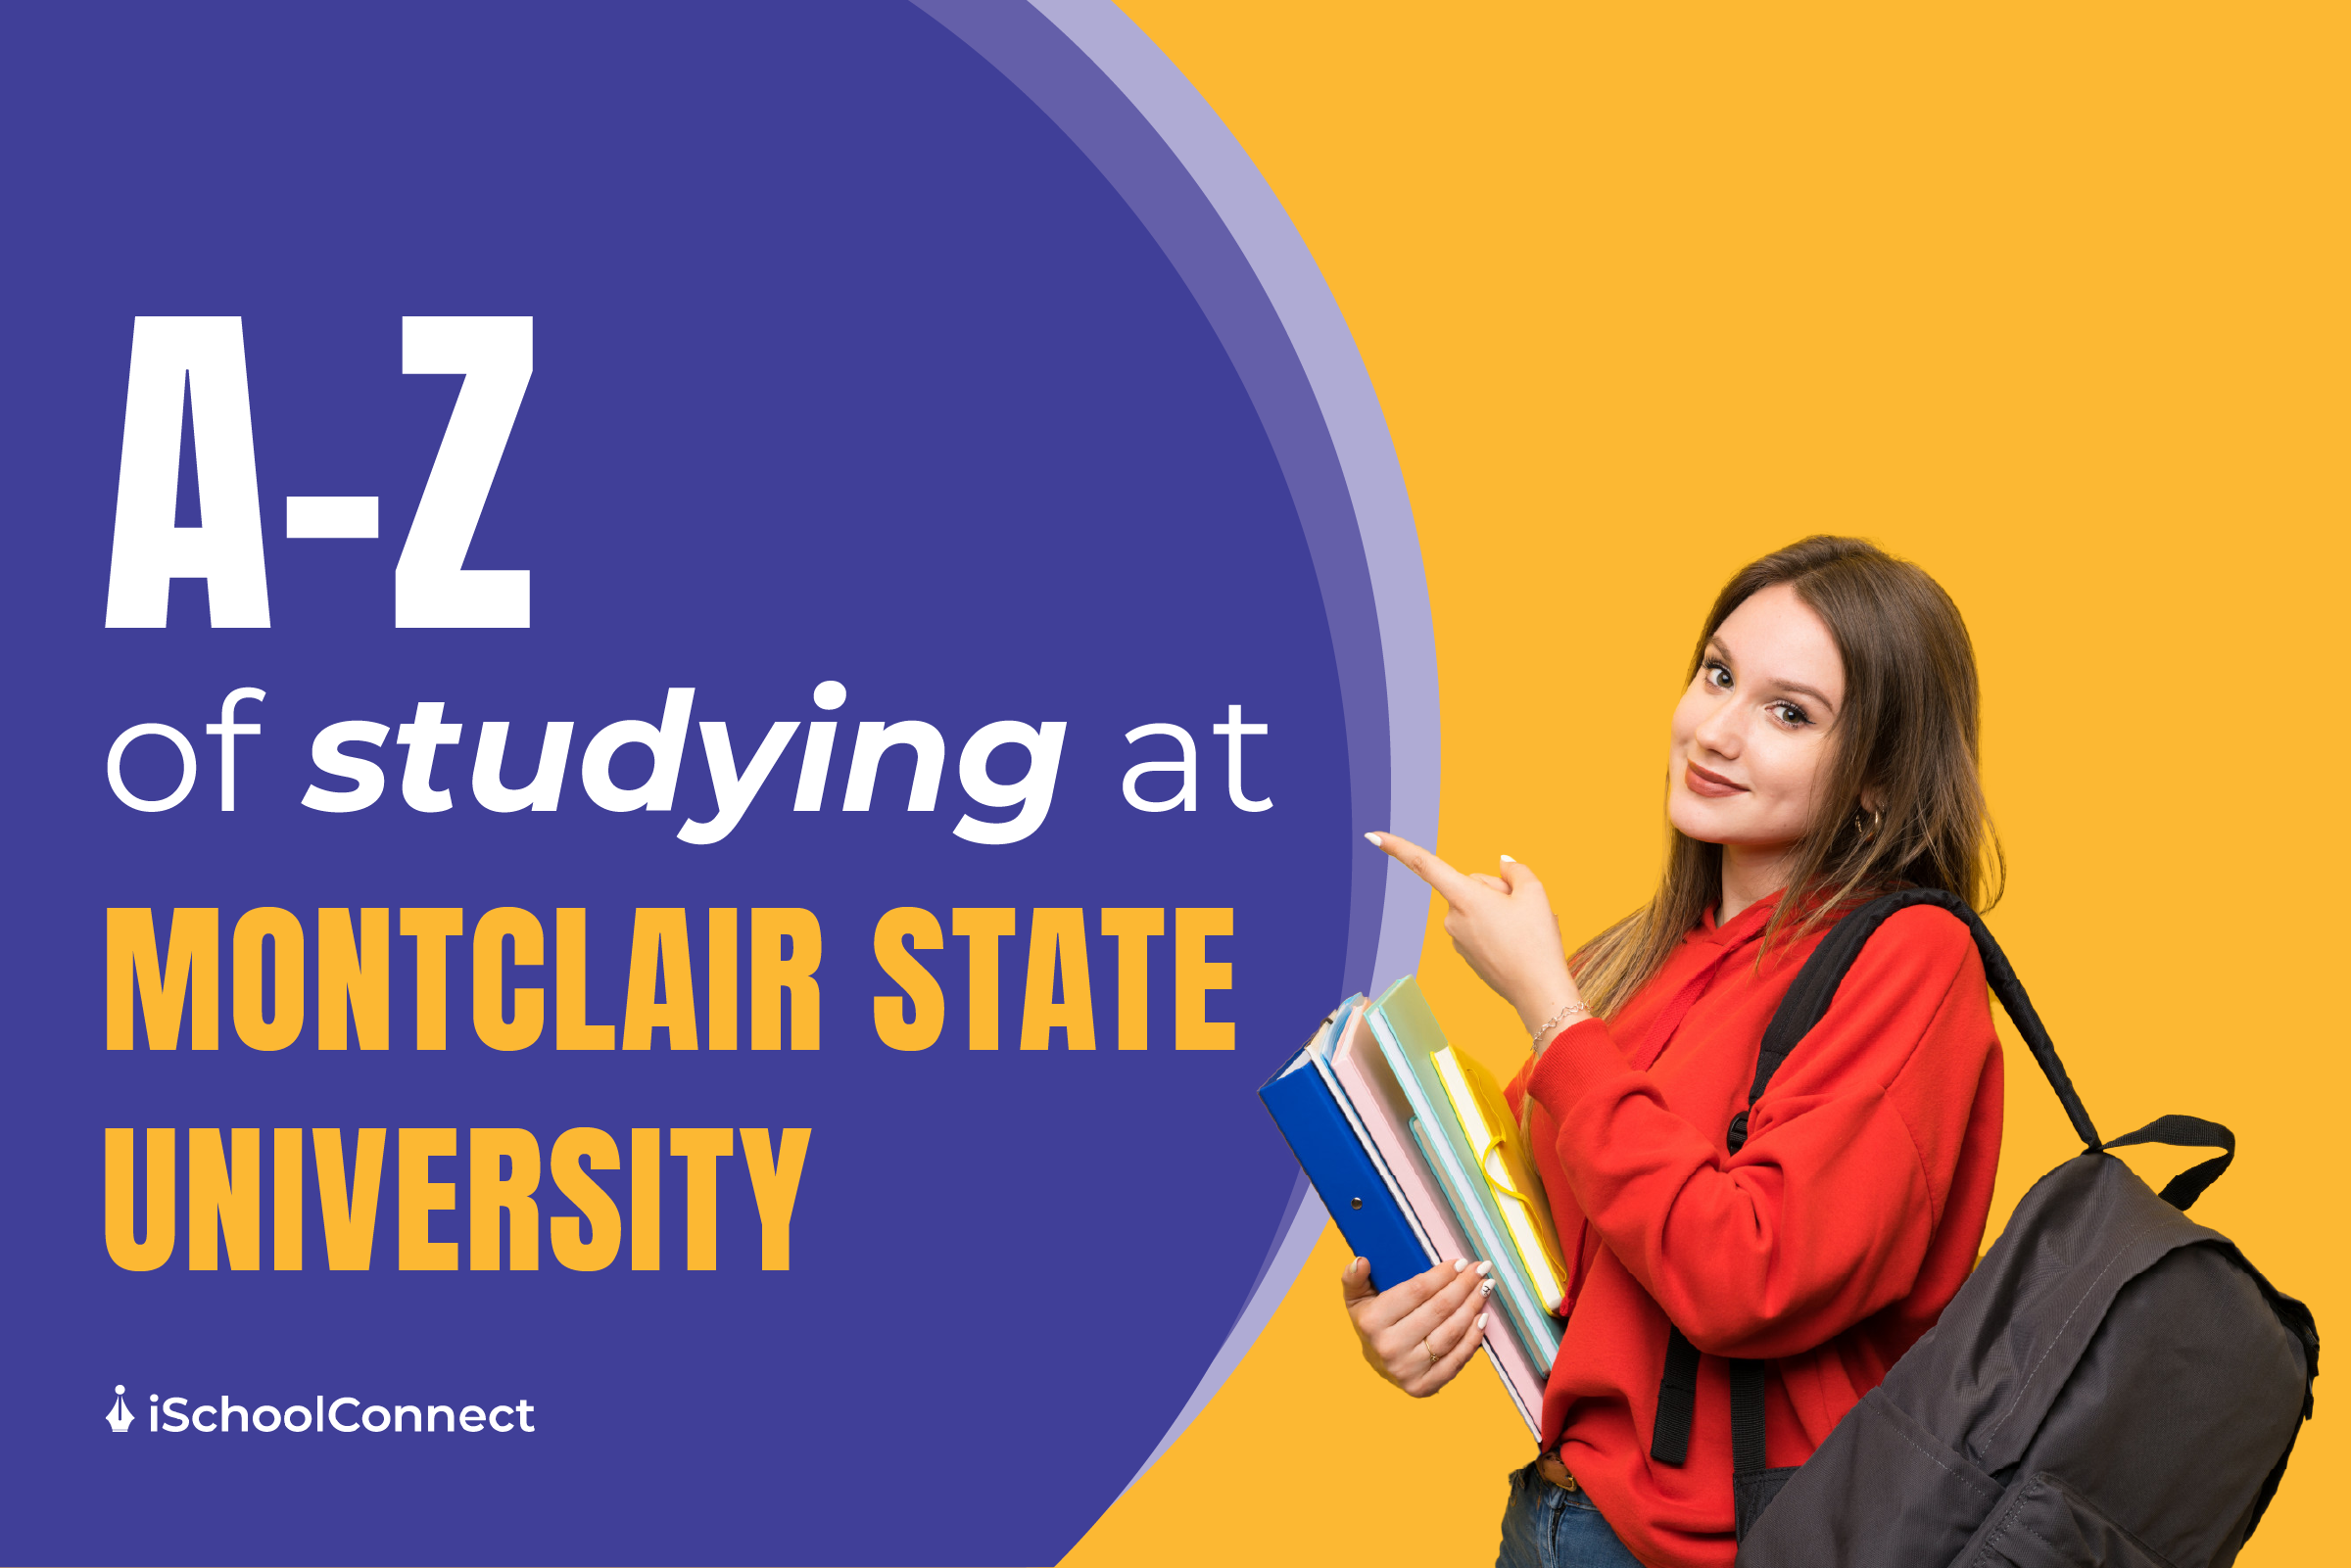 Montclair State University | Rankings, courses, and more.